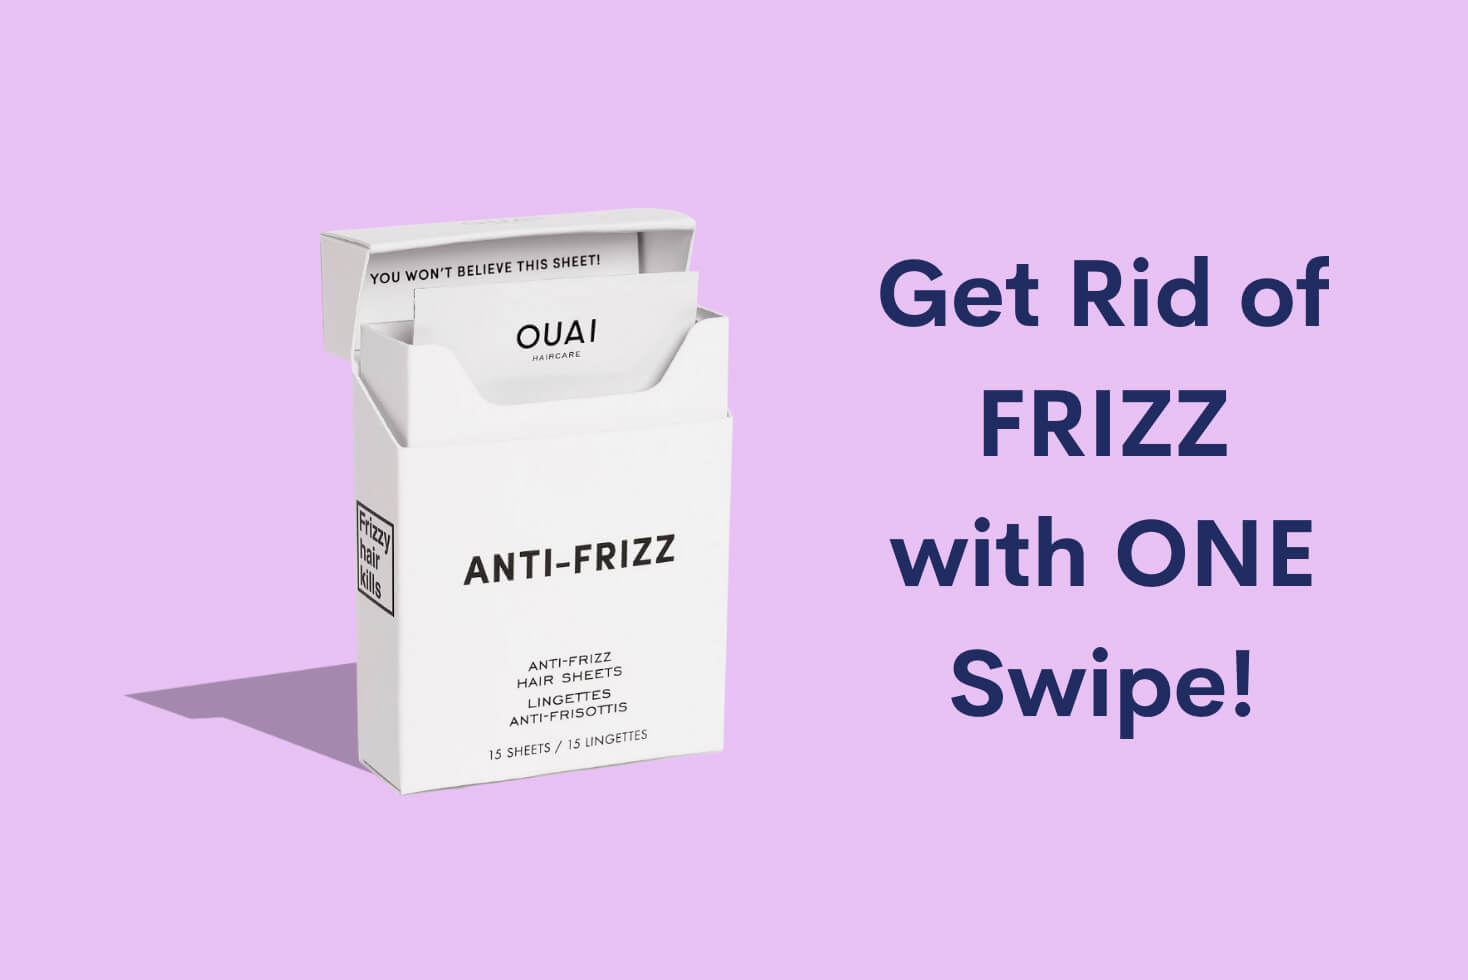 Anti Frizz Hair Sheets – A Genius Way to Swipe The Frizzies Out!